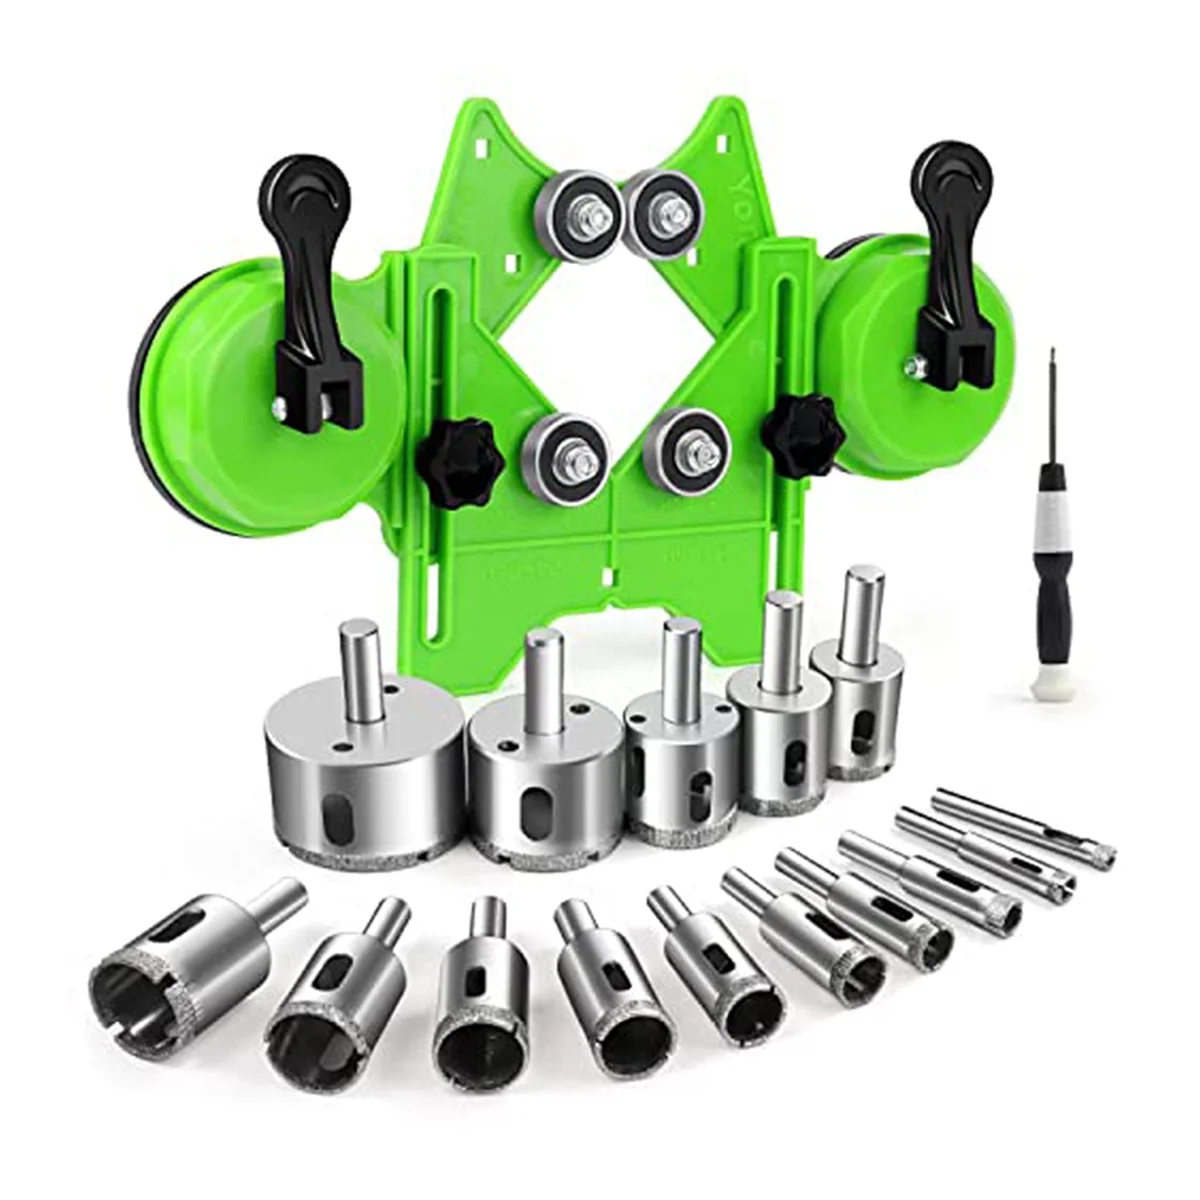 

Diamond Hole Saw Kit 17PCS Drill Bits Sets with Double Suction Cups Guide Jig Fixture From 4mm-83mm Hollow Drill Set